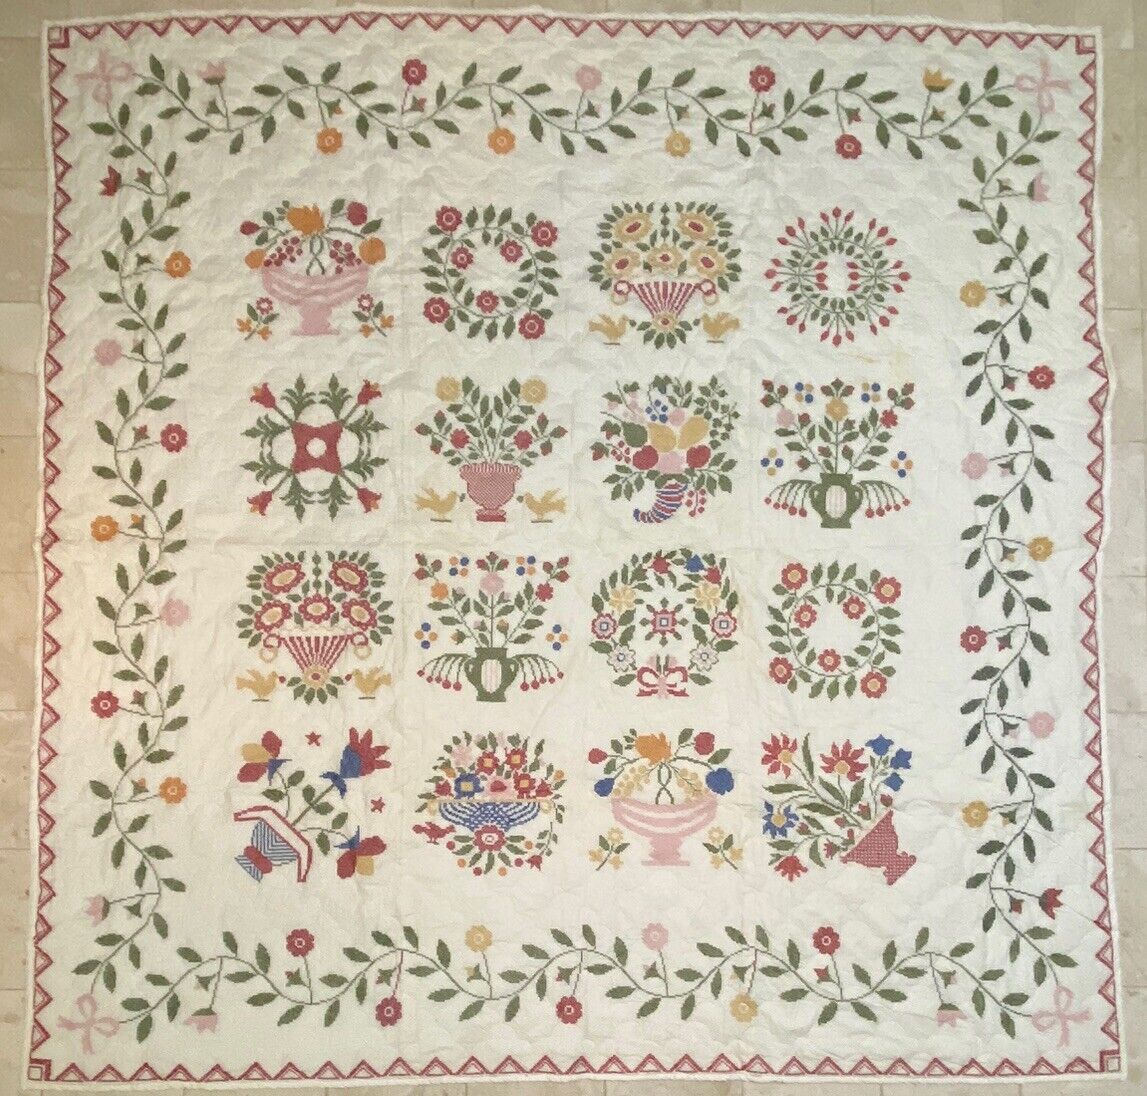 MAGNIFICENT 30's Floral Antique Quilt Hand Embroidered Accents LARGE 95” X 95”